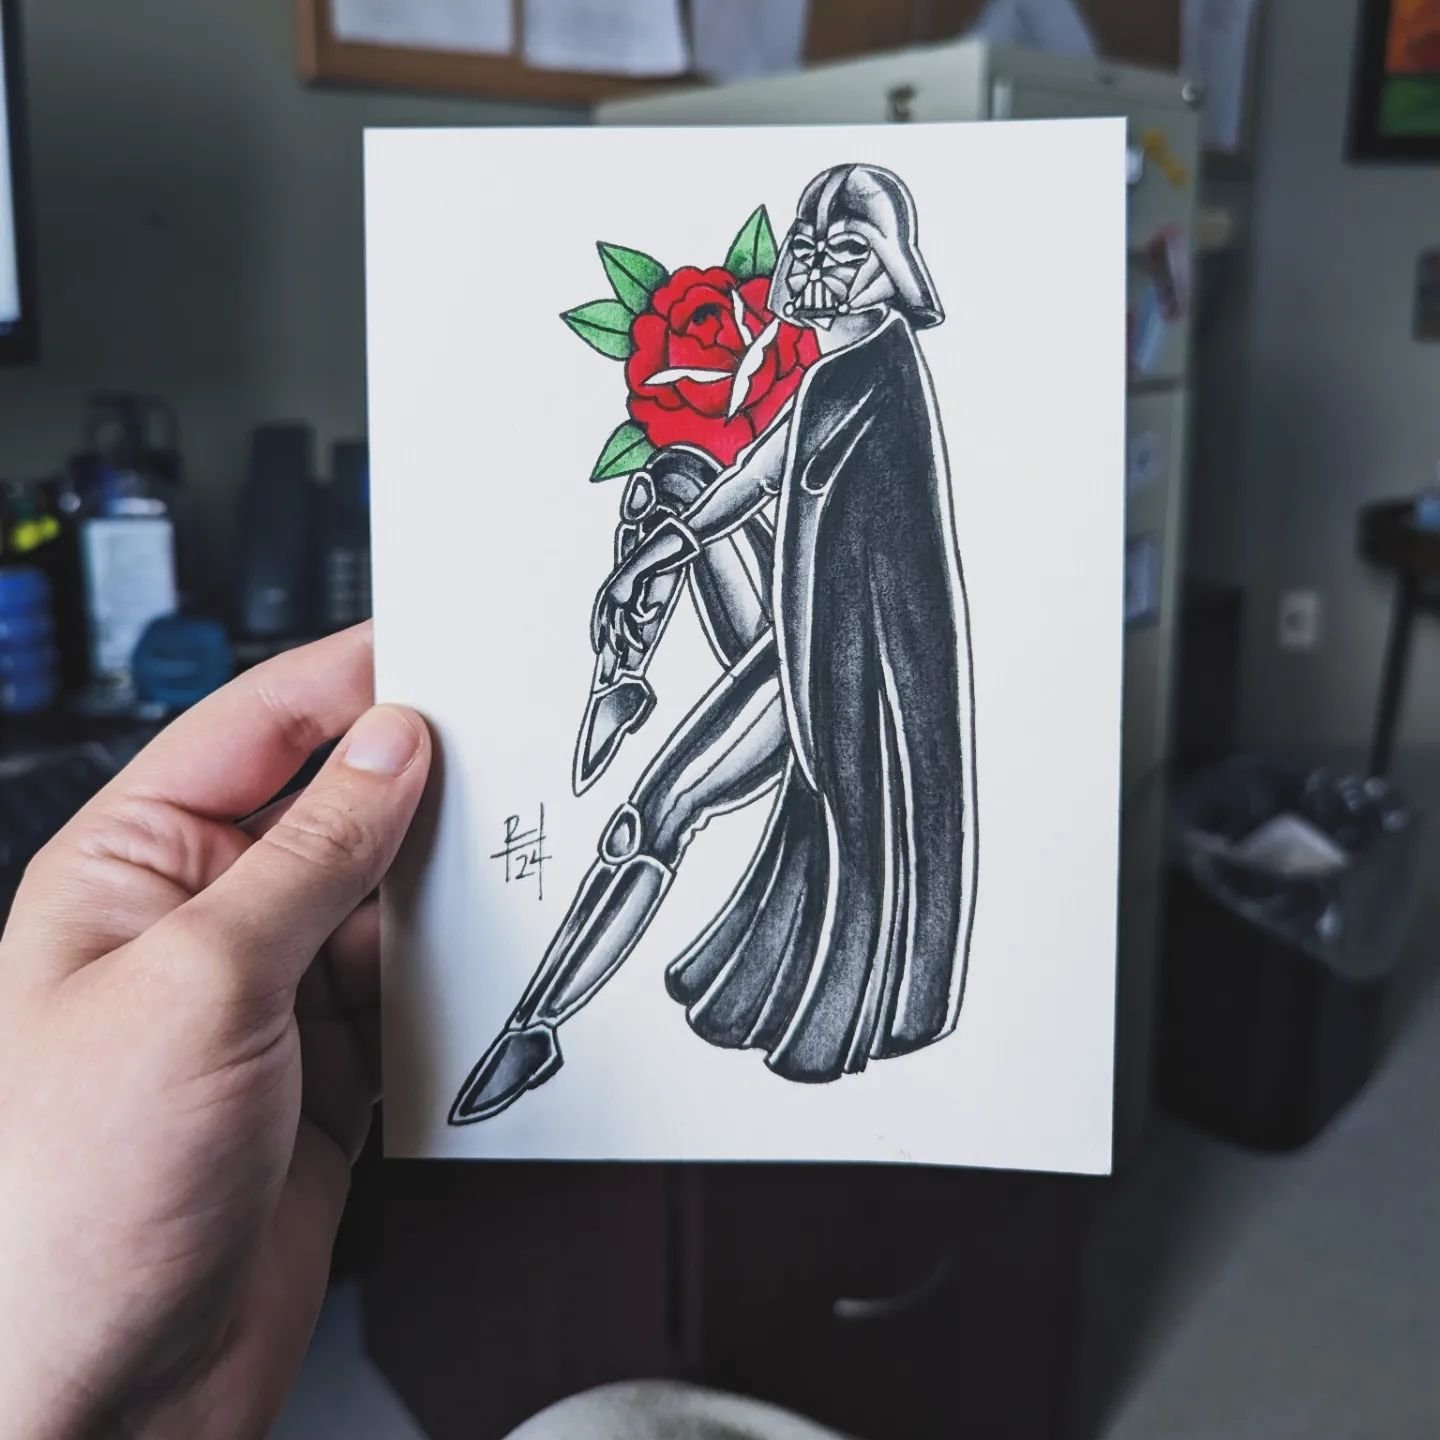 May the fourth be with you (but make it sexy) 
These are available to be tattooed for $200 through May. Full color, roughly 5*7 inches. Holler at me 🌈
.
.
.
.
.
.
.
#starwarsday #starwars #maythe4thbewithyou #starwarstattoo #tattooflash #bentonville